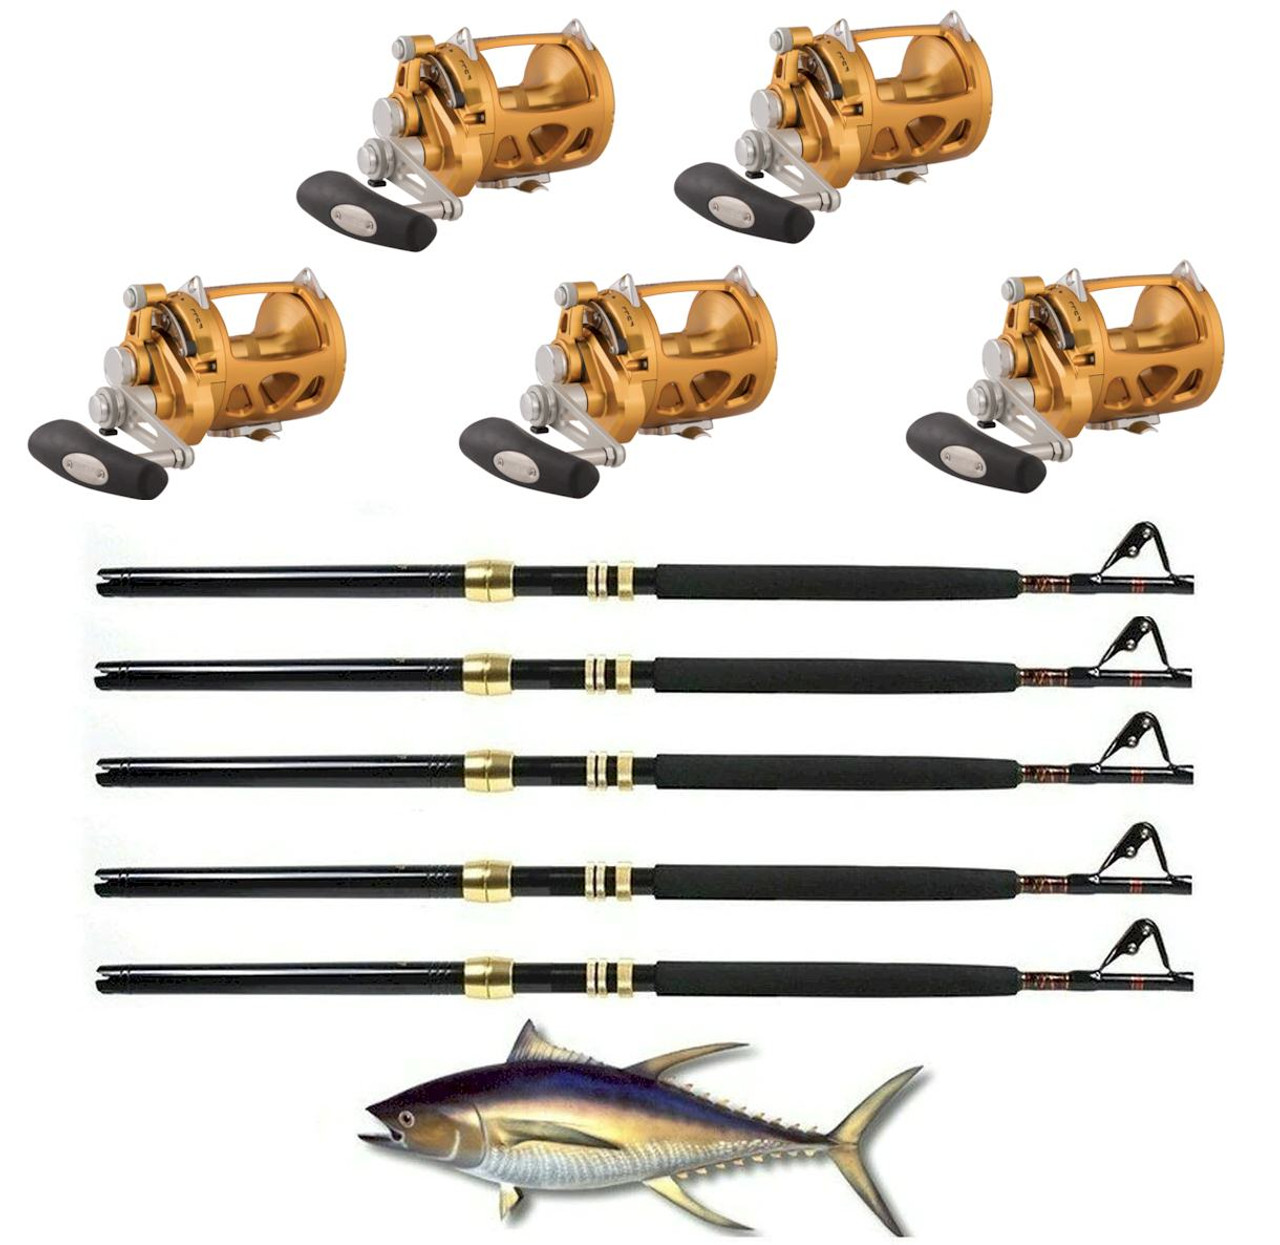 Tuna Fishing Reels products for sale